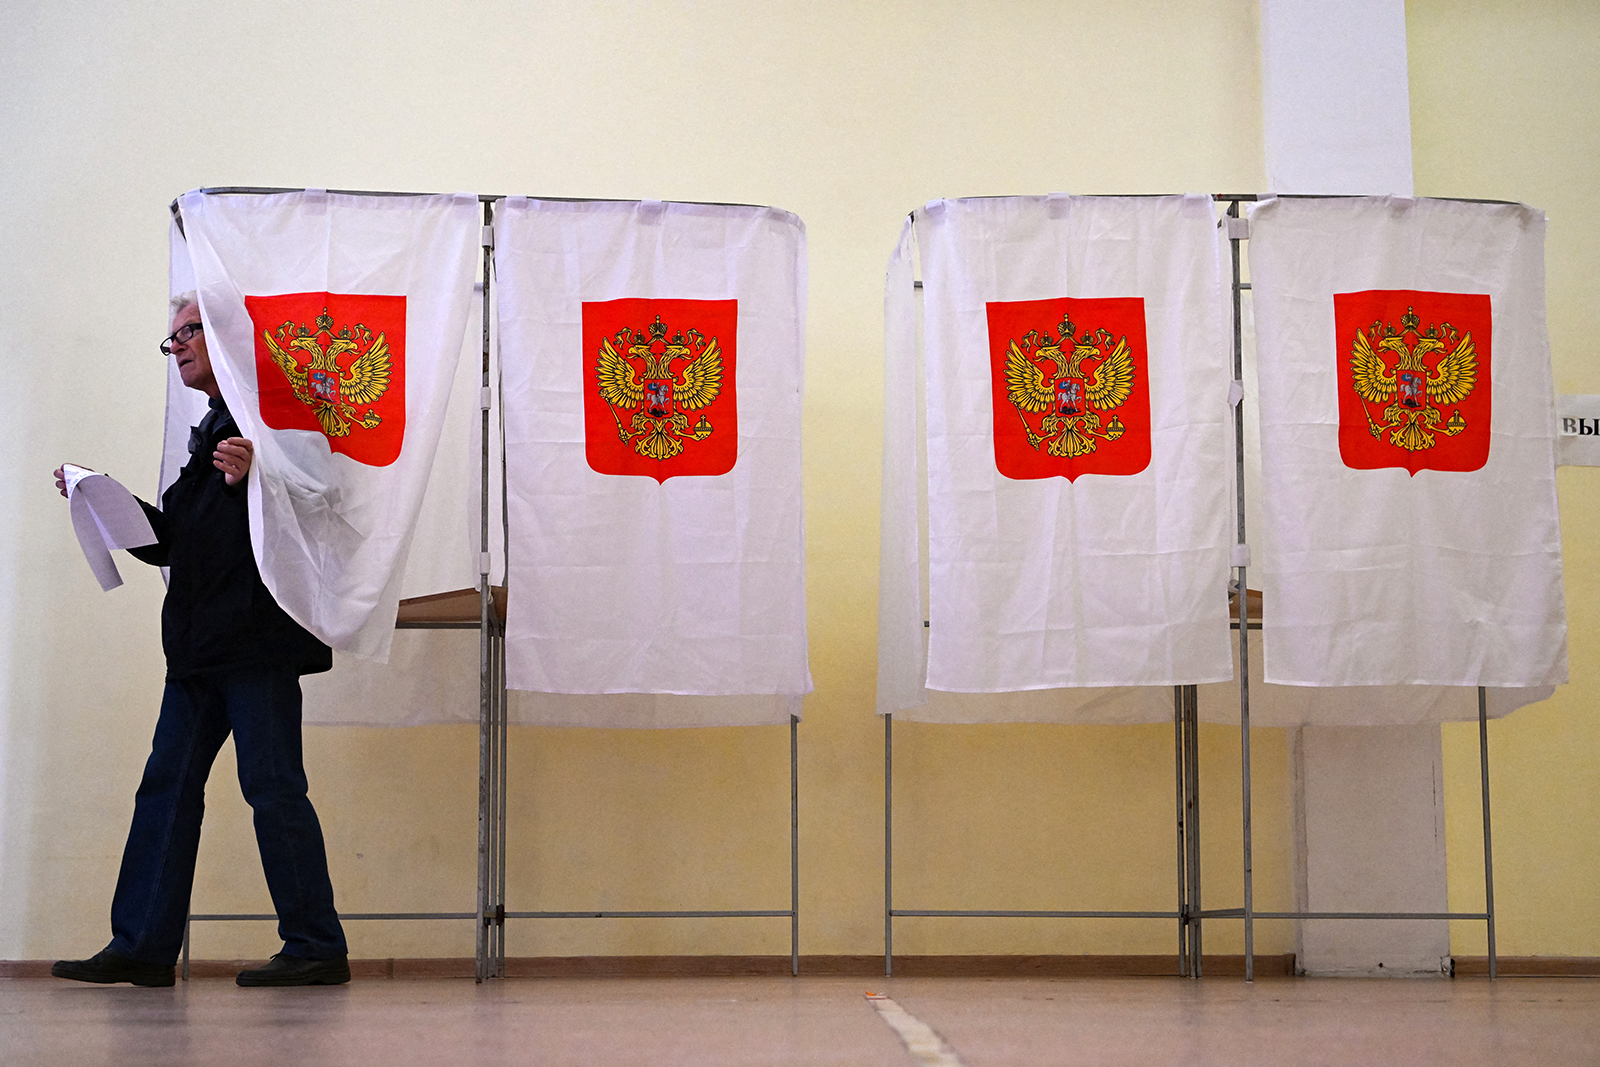 A man leaves a voting booth during the Moscow municipal deputies elections at a polling station in Moscow on September 9.